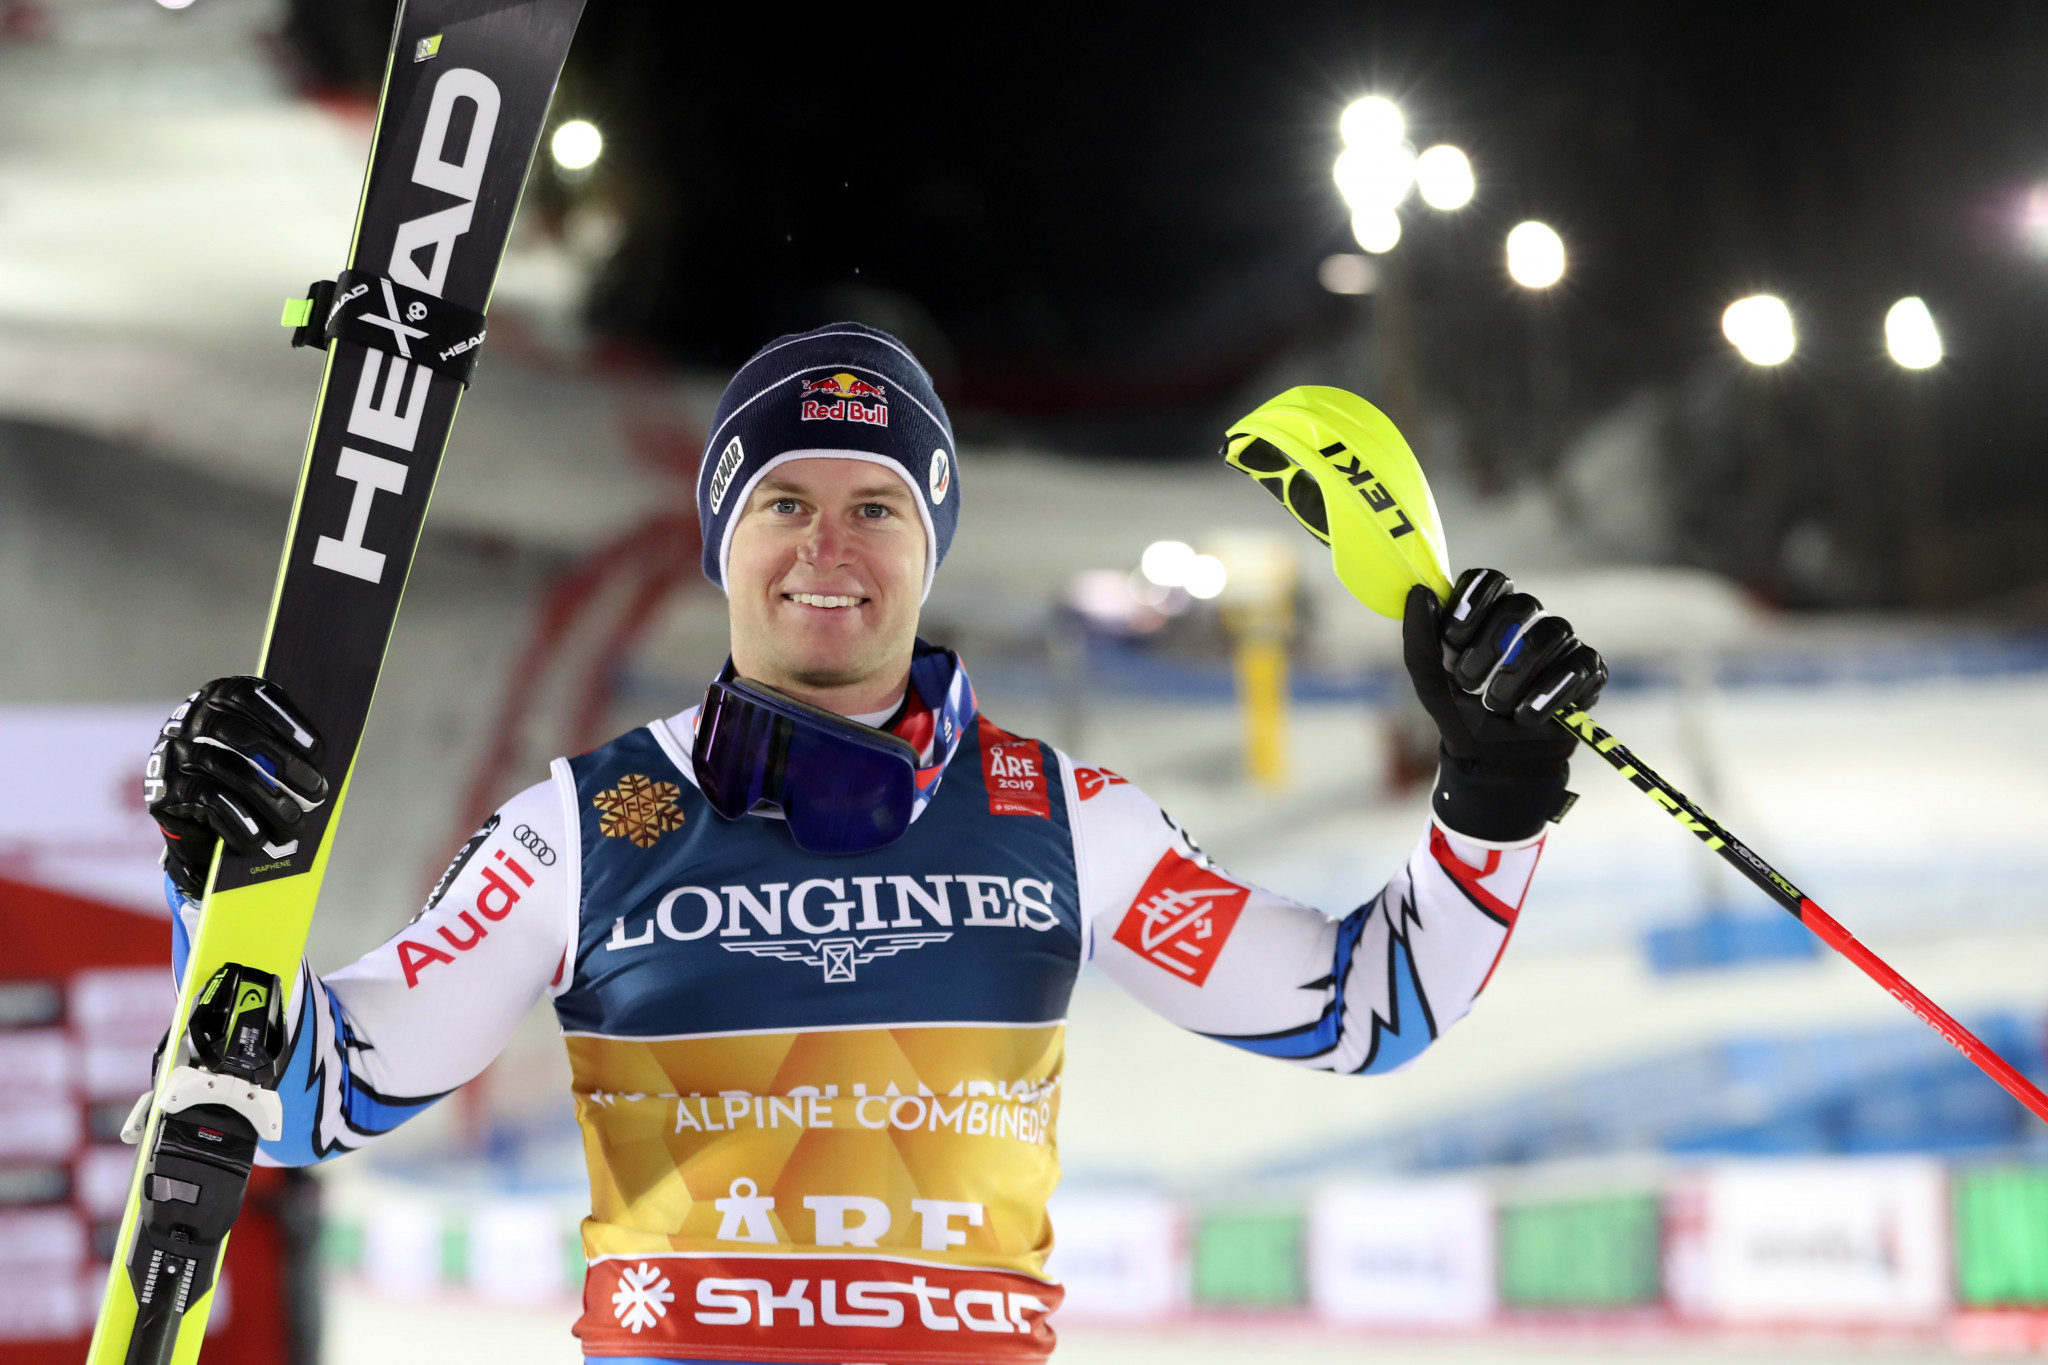 Pinturault uses slalom skill to win Alpine combined title at Alpine Skiing World Championships 